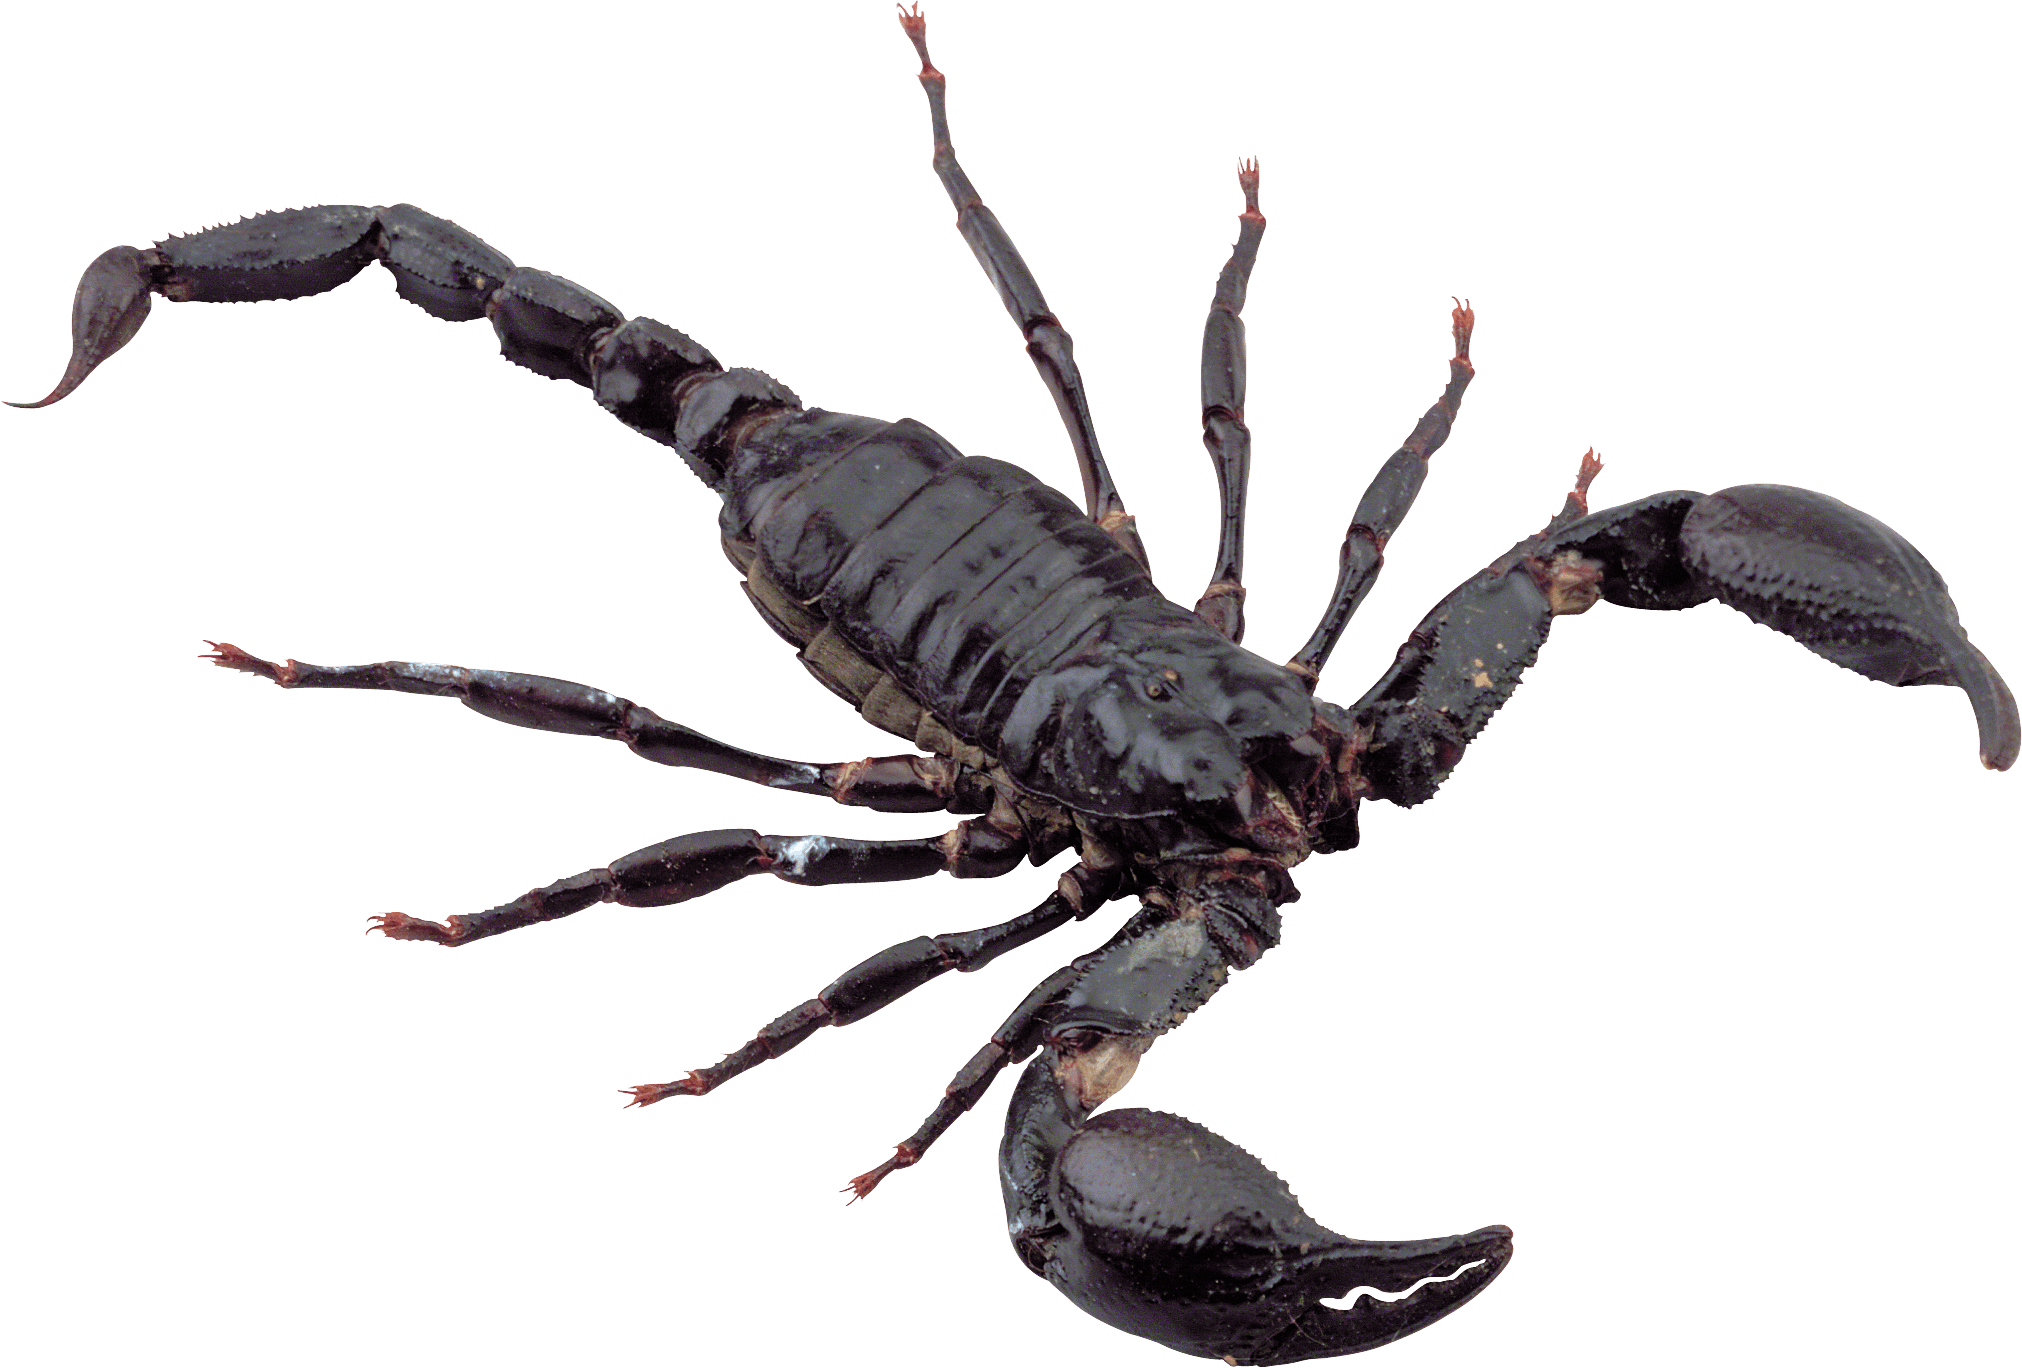 insects clipart scorpion